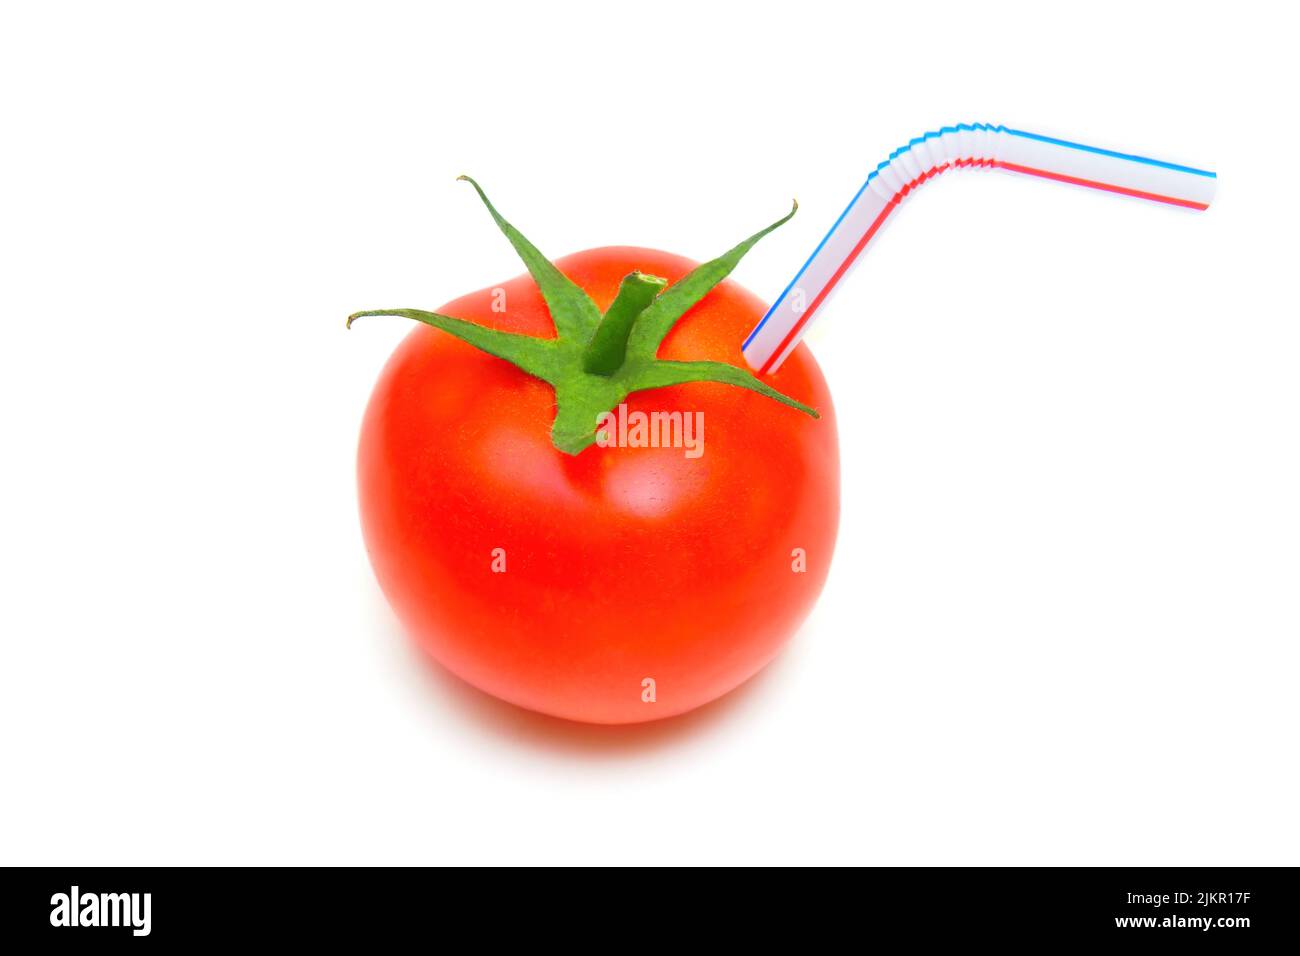 Ripe cocktail tomato with a drinking straw isolated on white background. Organic tomato juice concept. Stock Photo